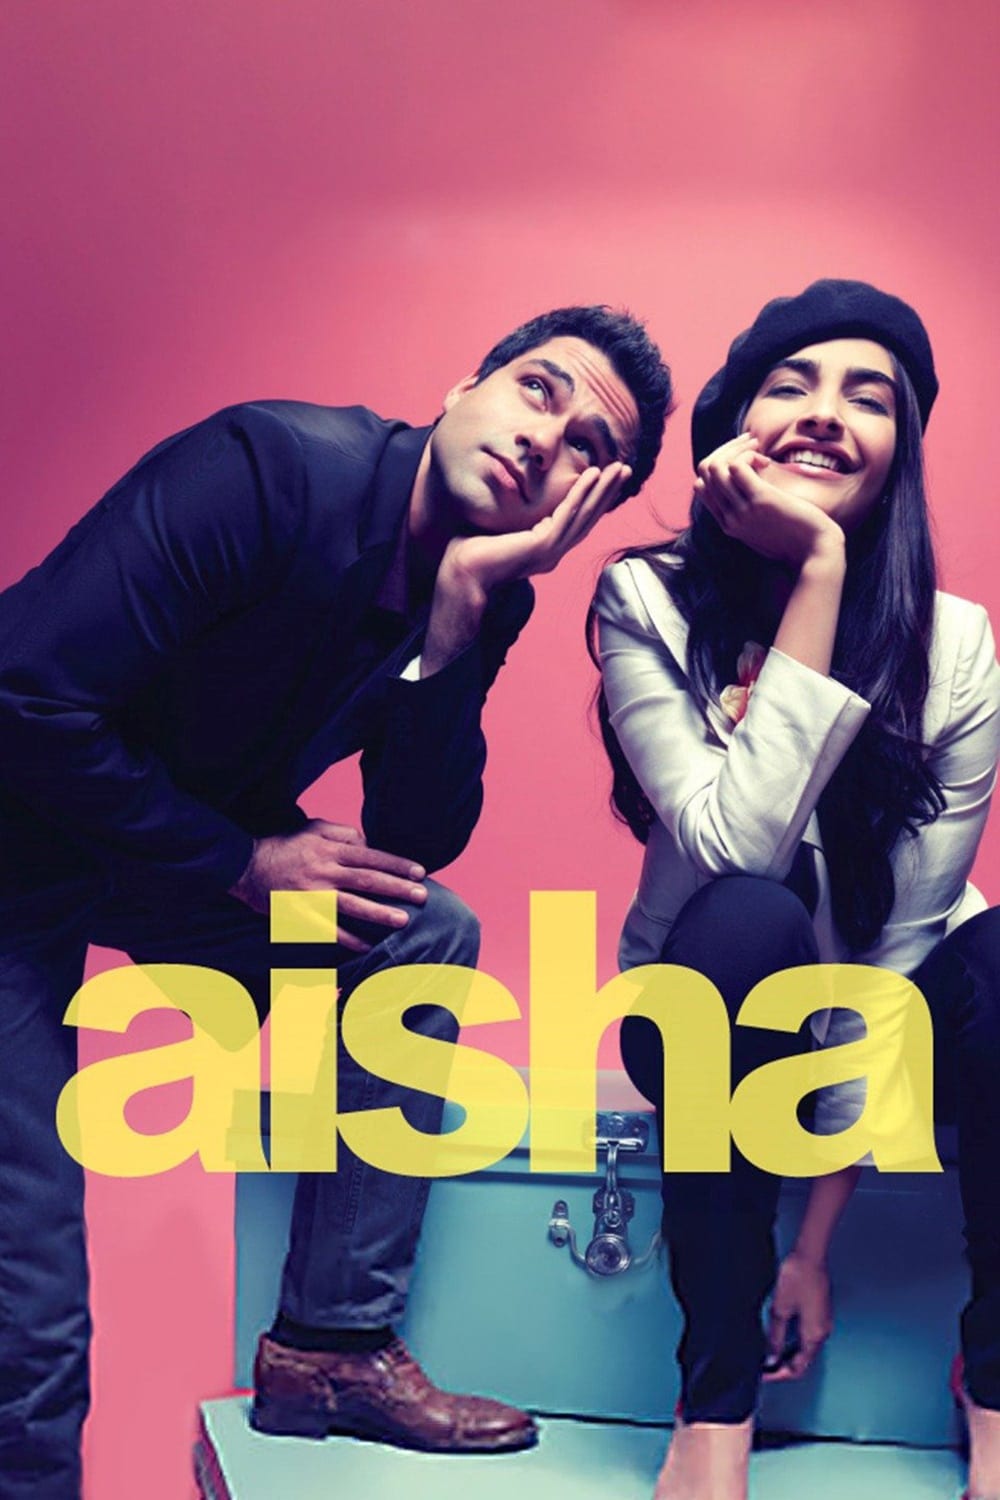 Poster for the movie "Aisha"